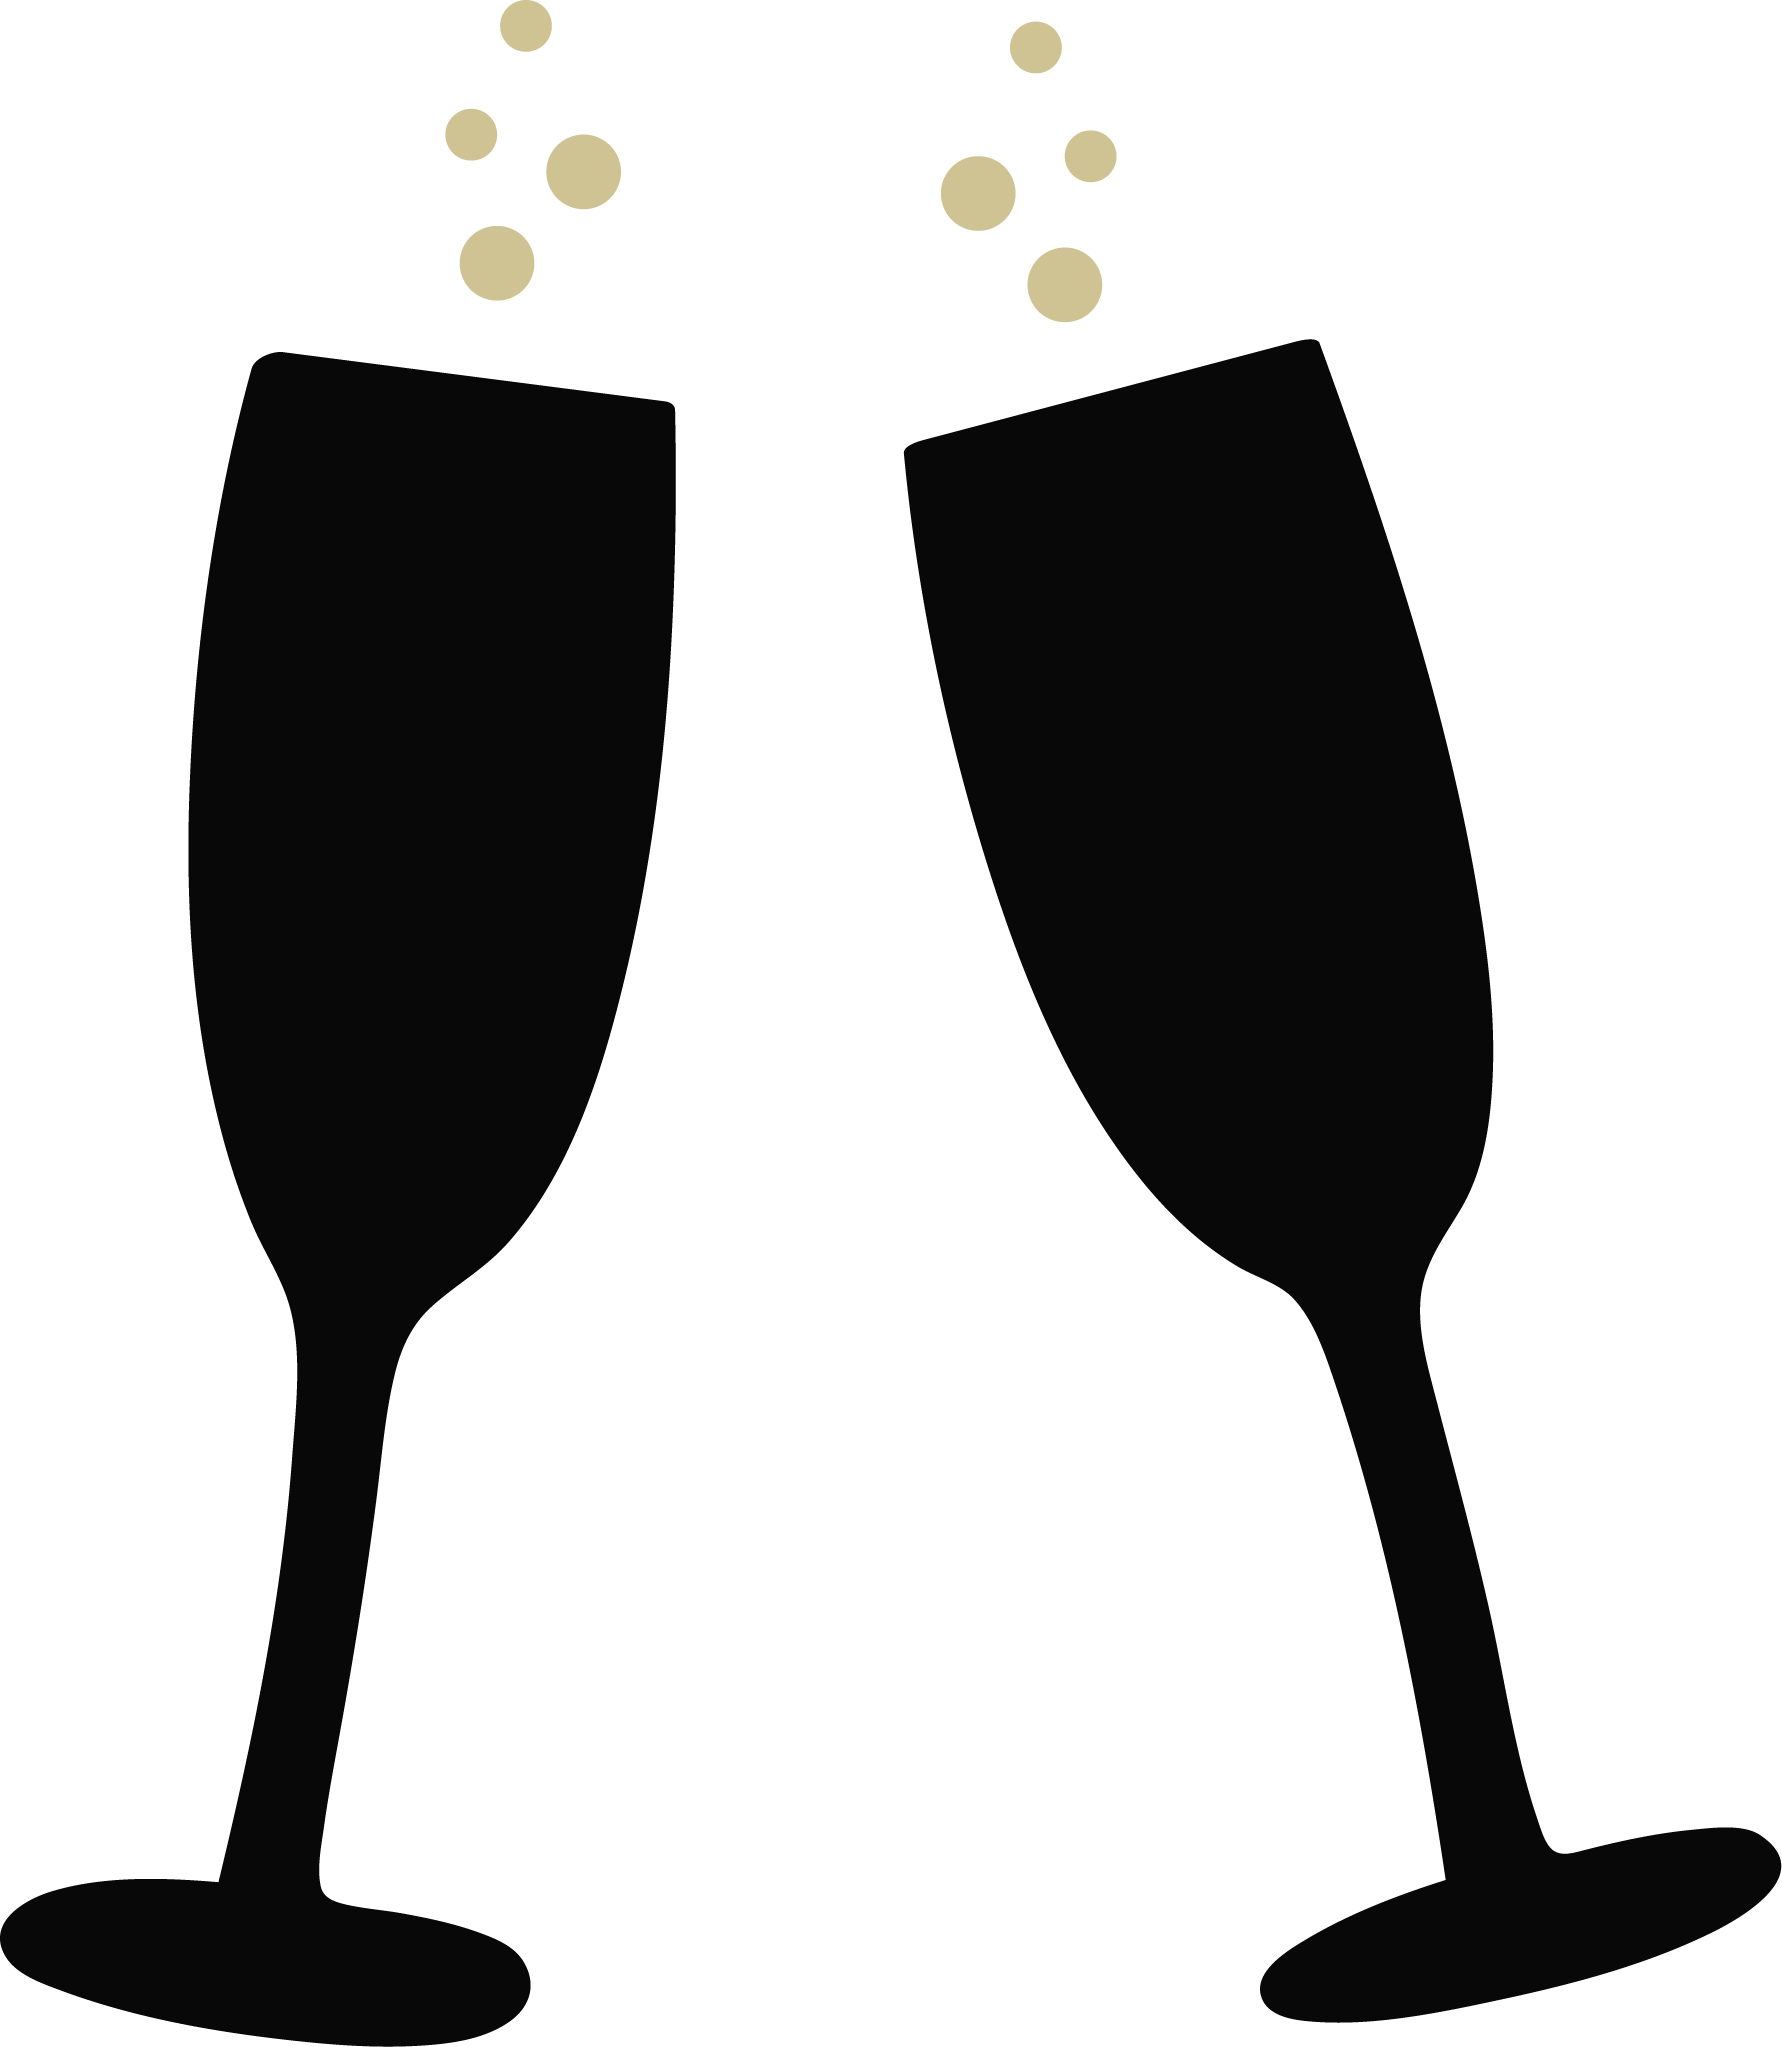 Champagne Glasses Icon. Celebrate Special Occasions or Host Private Events at the Champagne Barn.